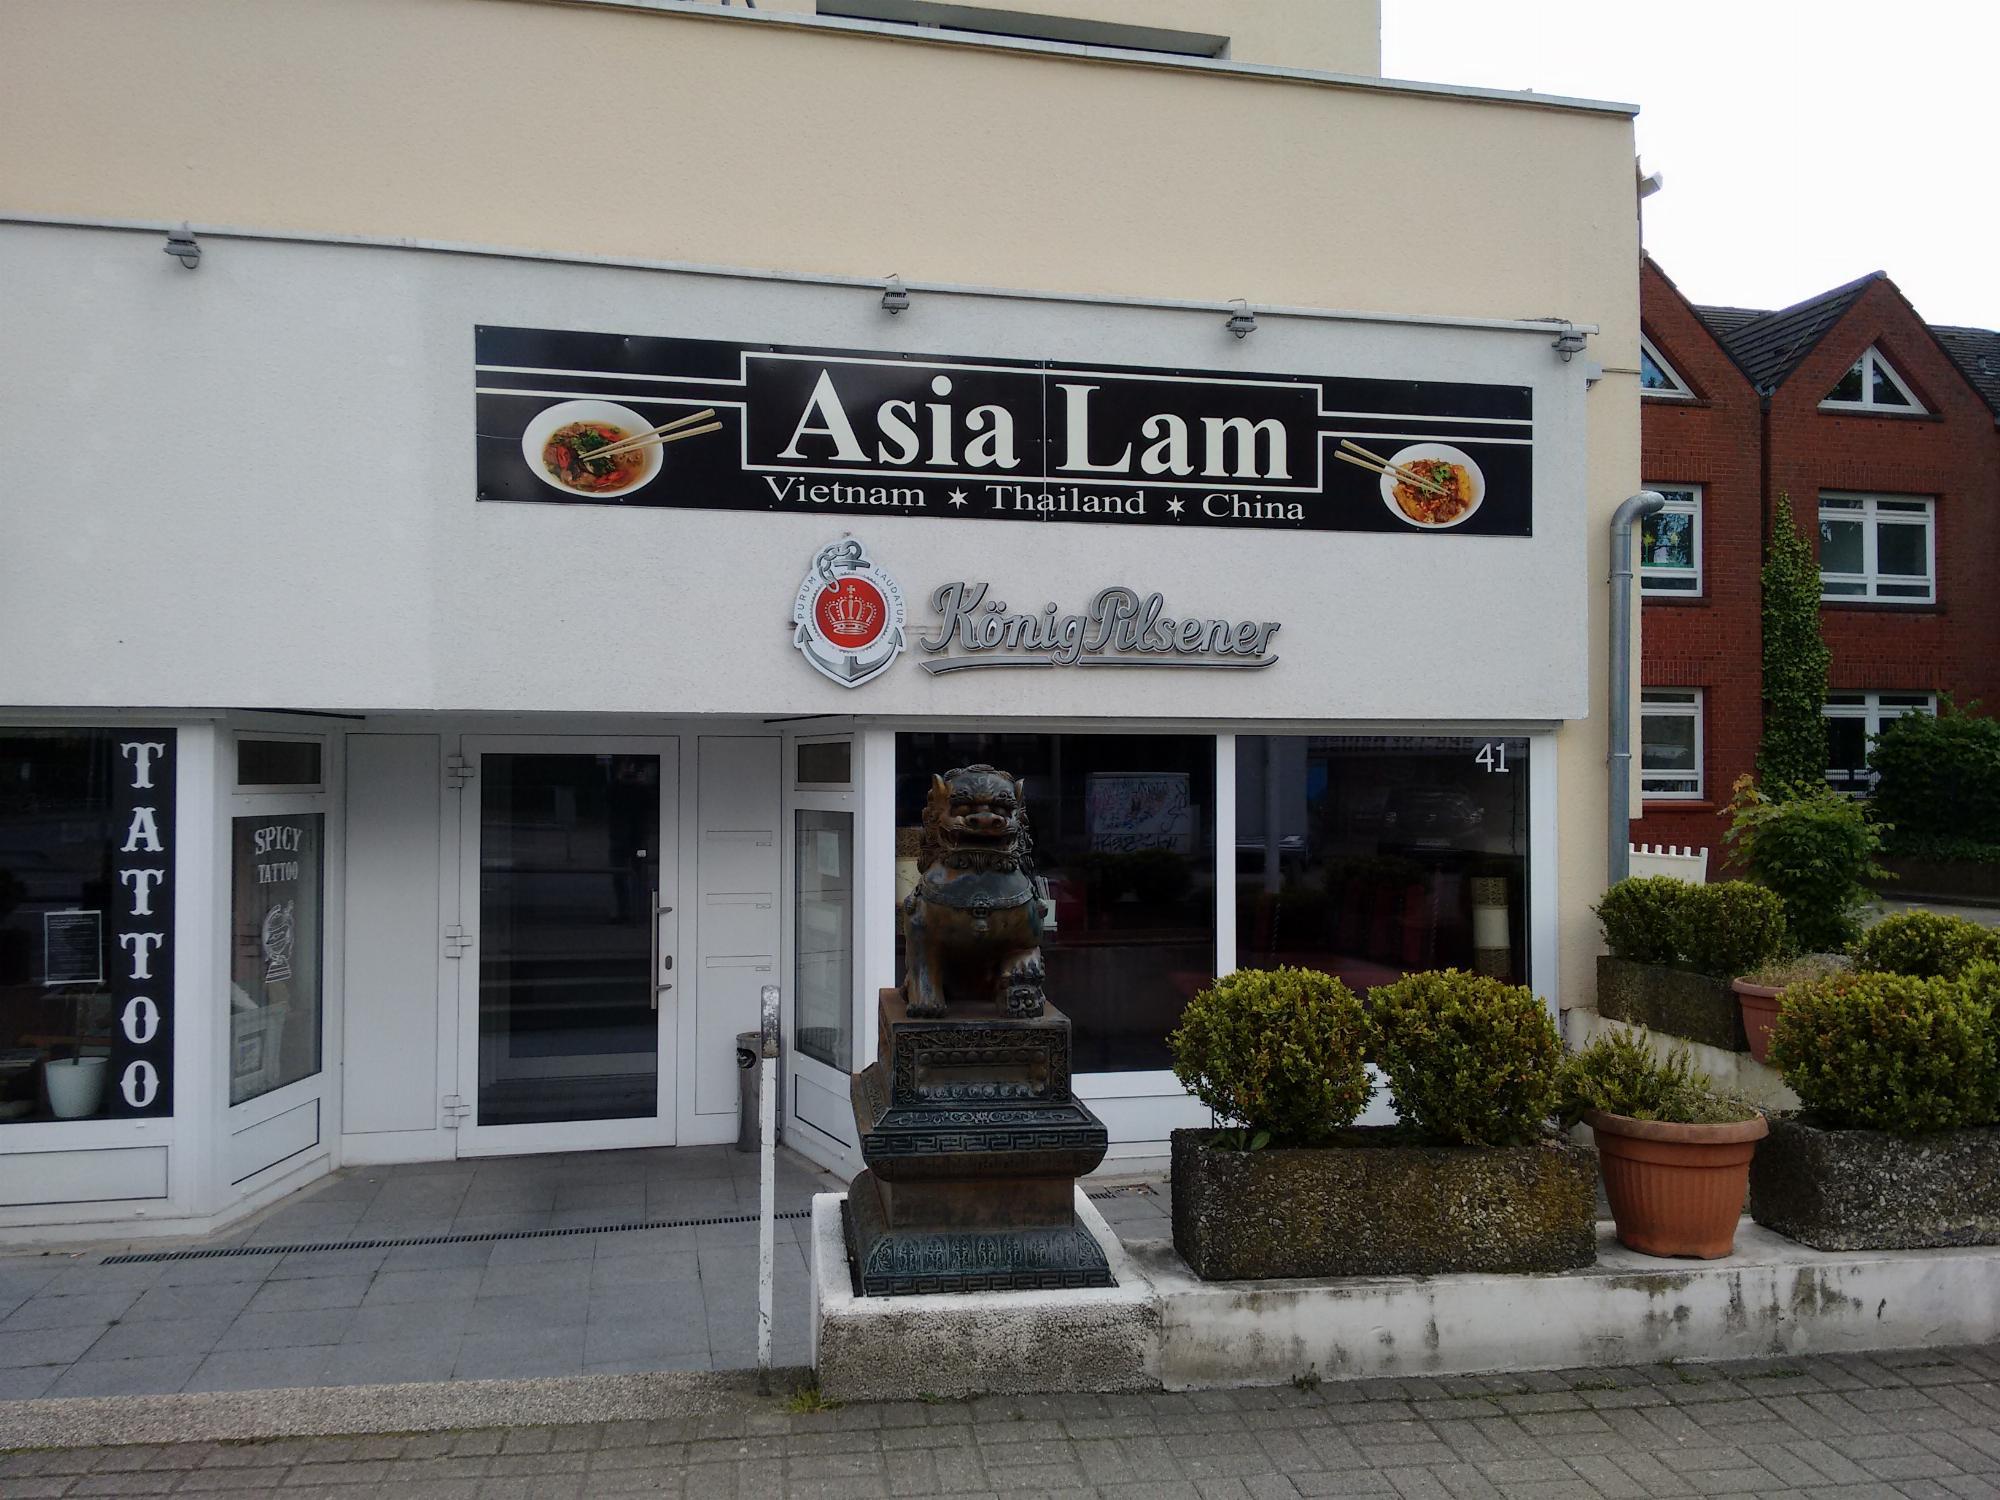 Asia Lam in Rahlstedt